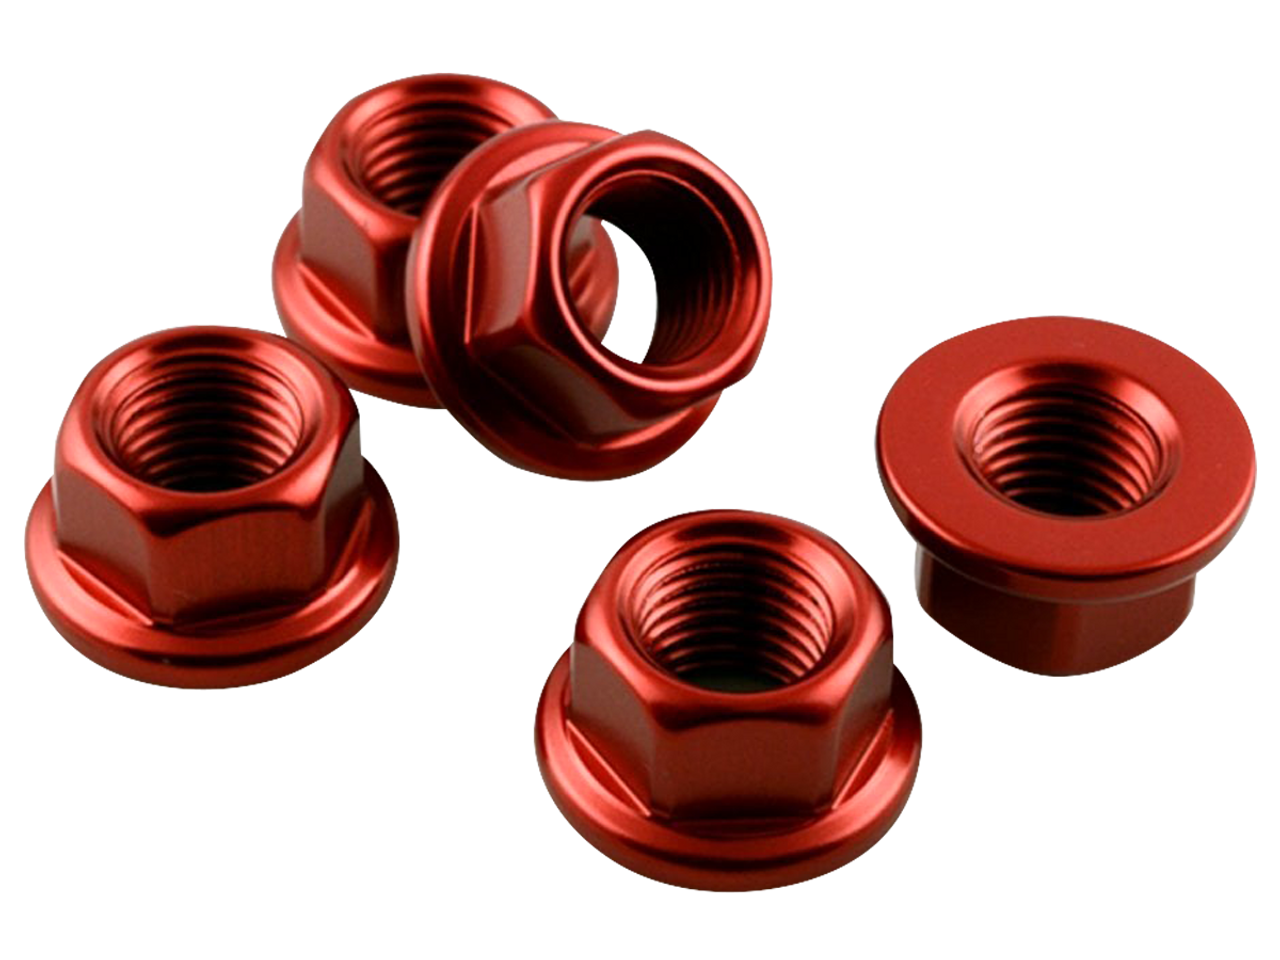 https://cdn11.bigcommerce.com/s-pk76o/images/stencil/1280x1280/products/7404/51954/Aluminum-Rear-Sprocket-Nut-Kit-Red__16259.1643865146.png?c=2